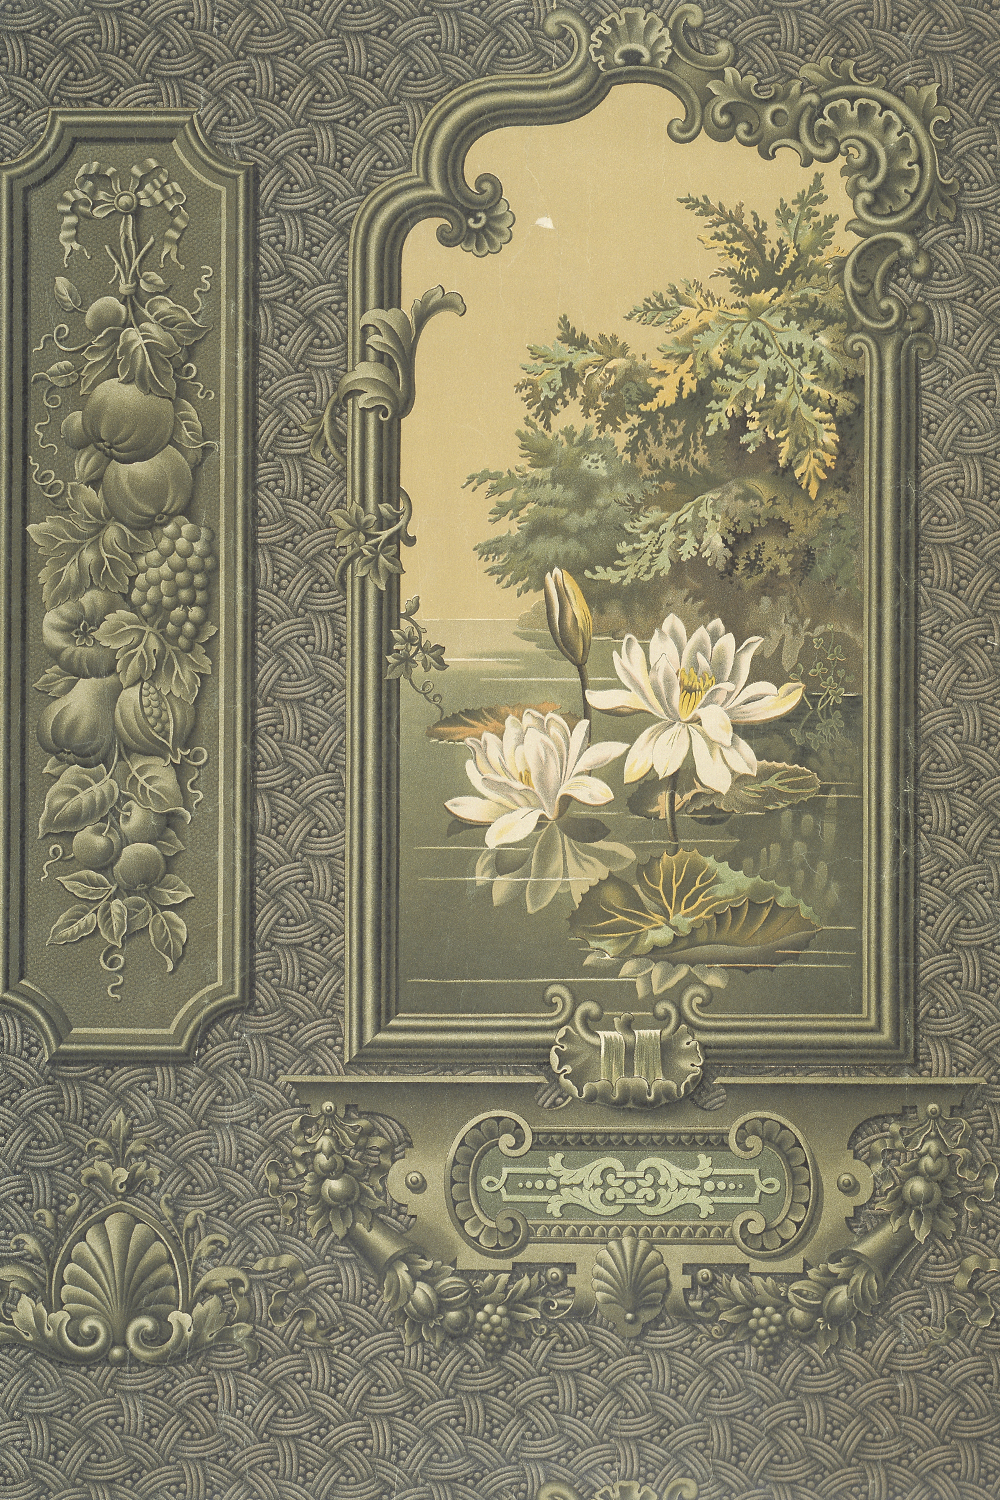 Wallpaper Health And Cleanliness Victoria Albert Museum